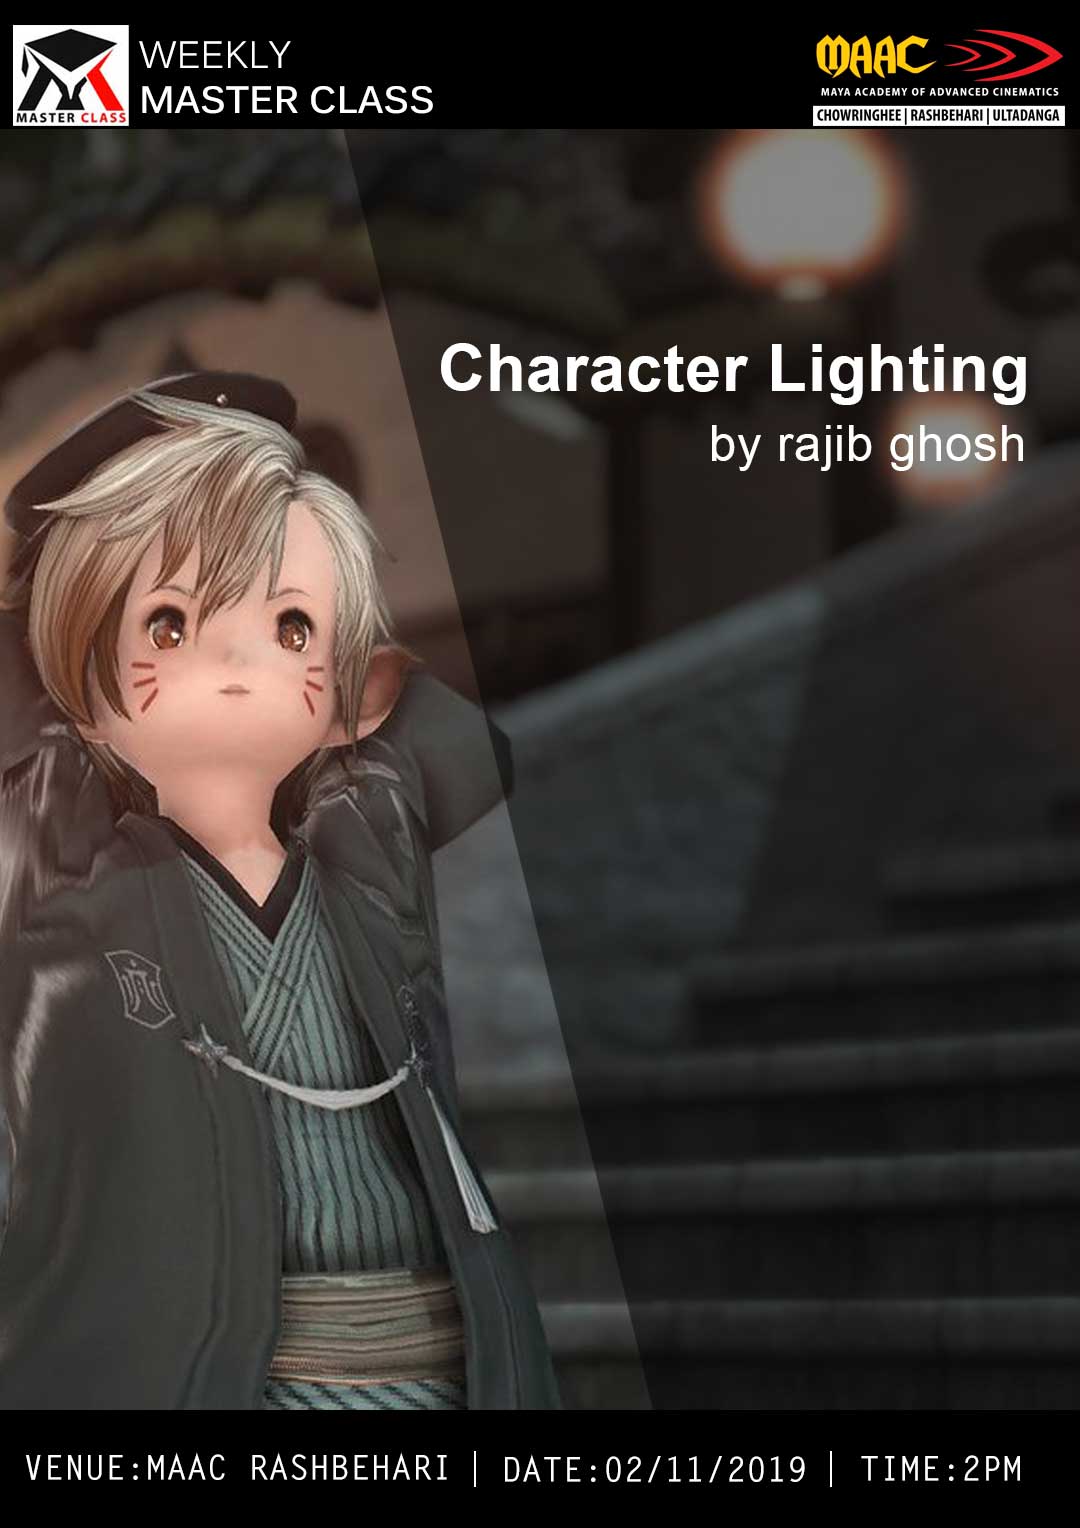 Weekly Master Class on Character Lighting